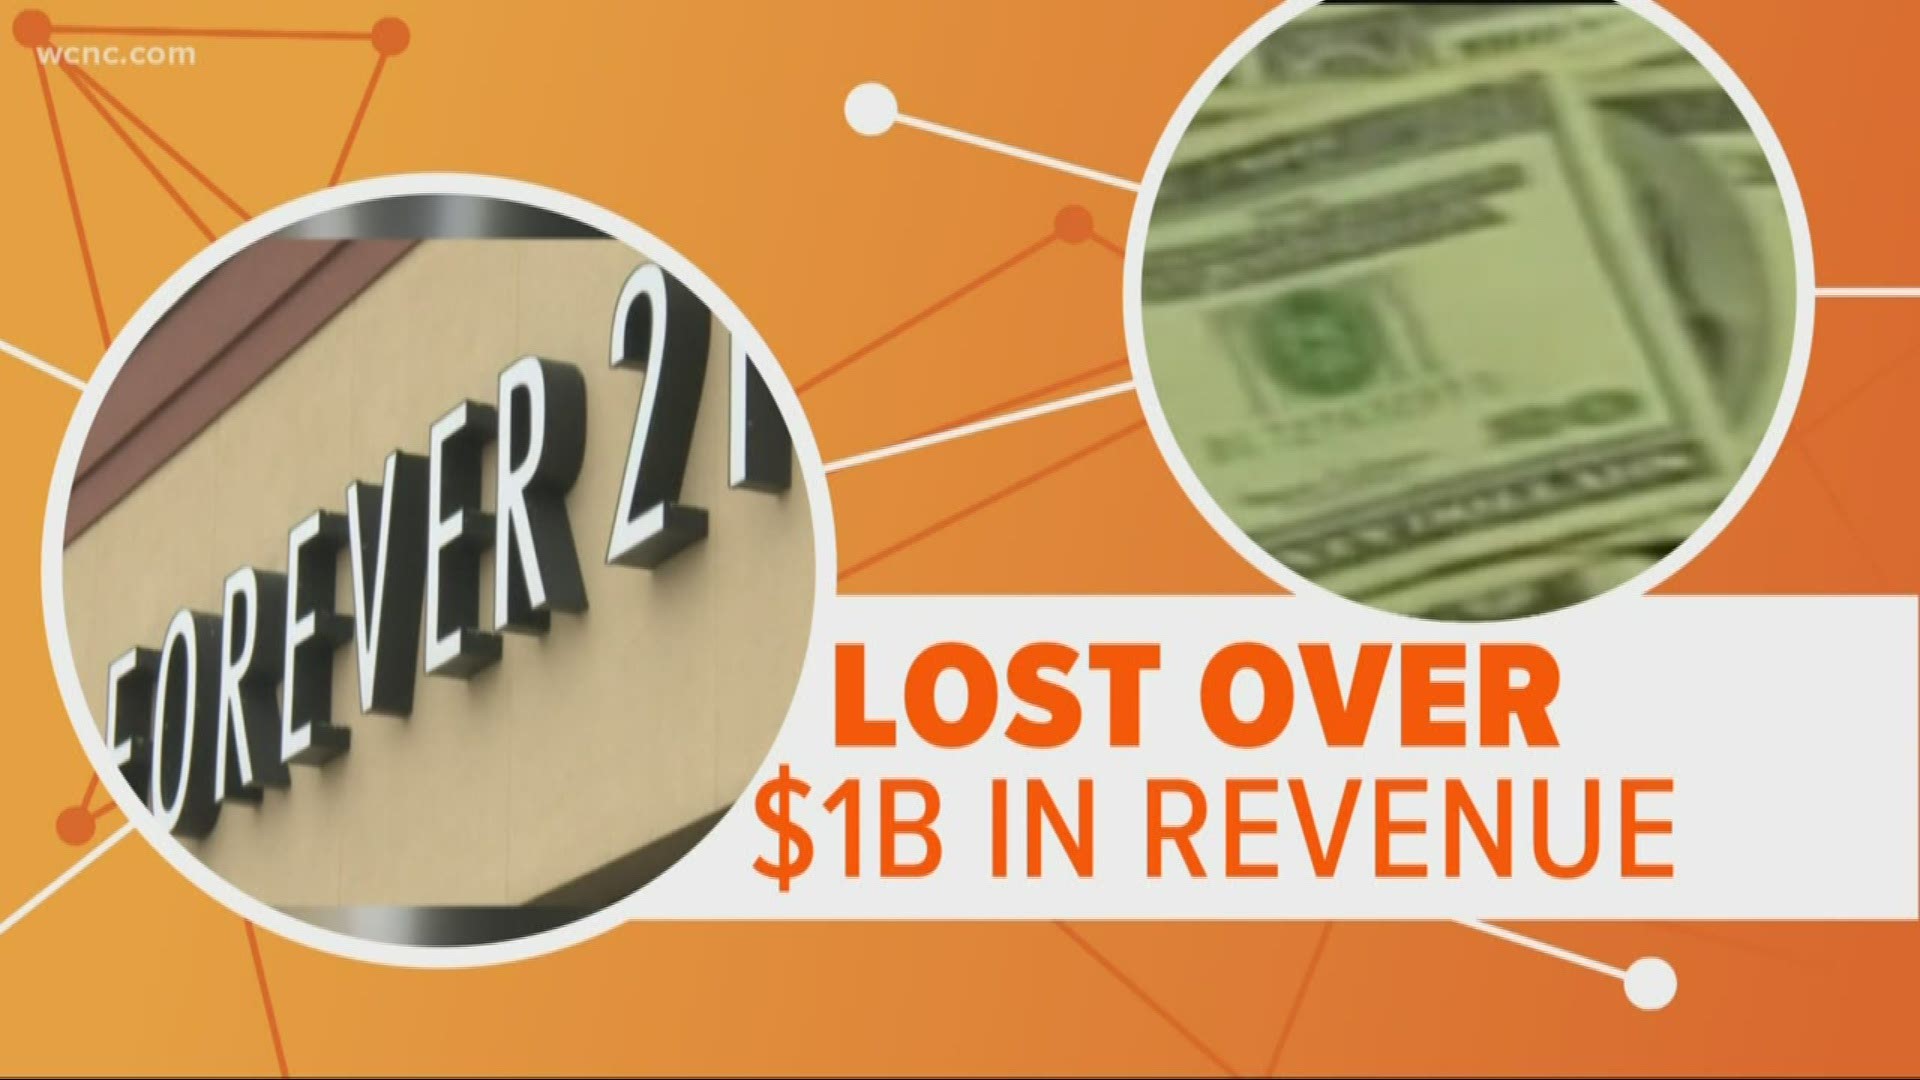 Retailer Forever 21 recently filed for bankruptcy and announced they will close over 350 stores worldwide. Unfortunately, they're not alone in that department.